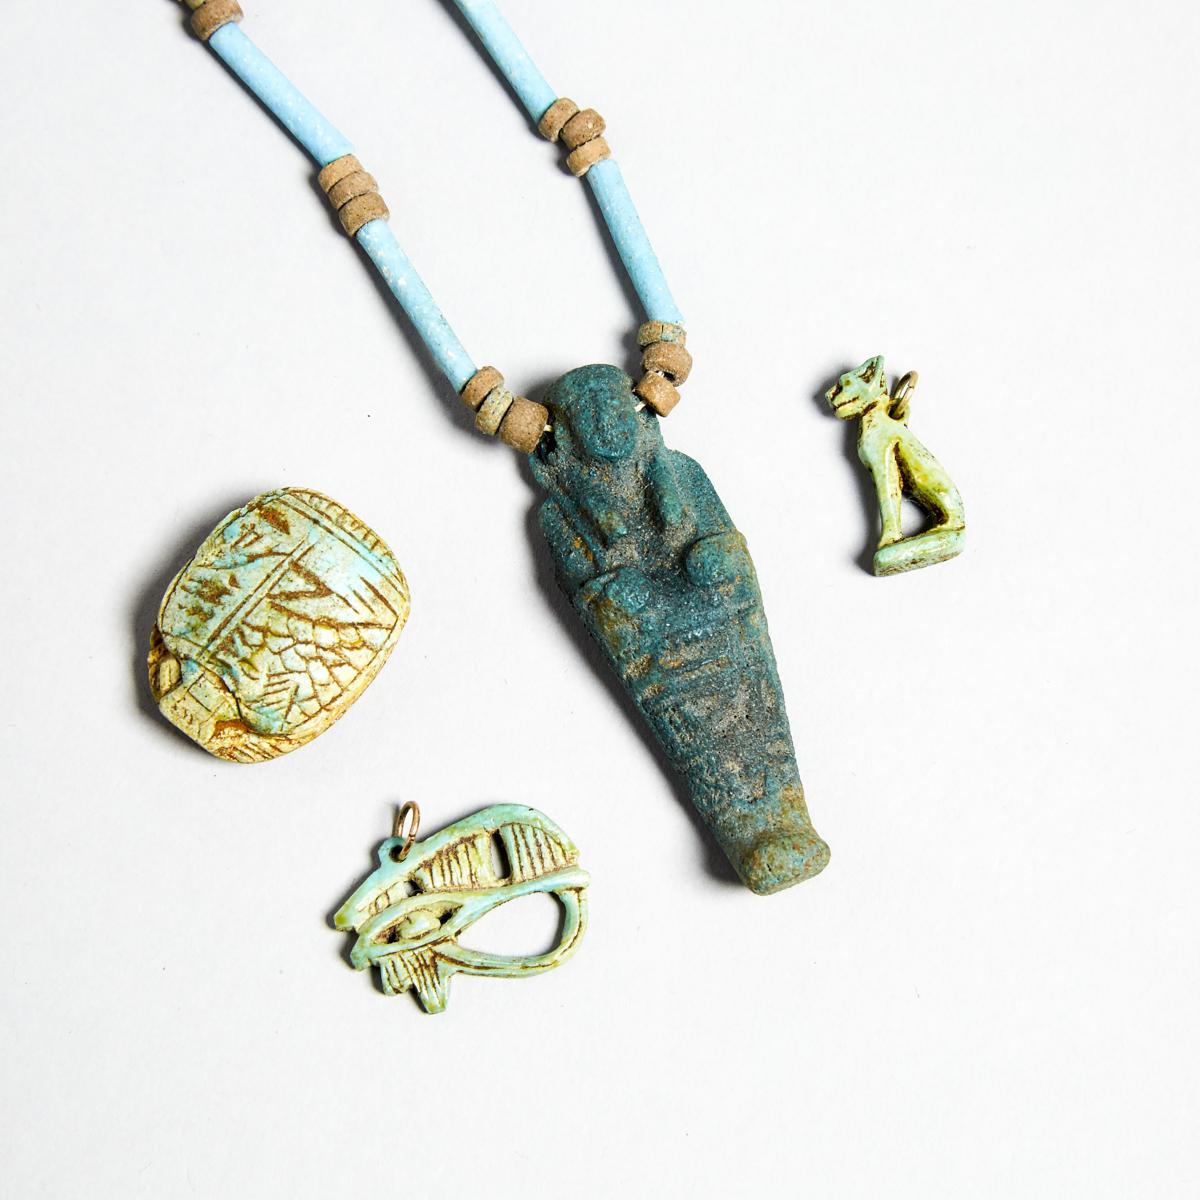 Group of Egyptian Turquoise Faience Amulets and Beads, New Kingdom to Late Period, 1550-332 B.C., sh - Image 2 of 3